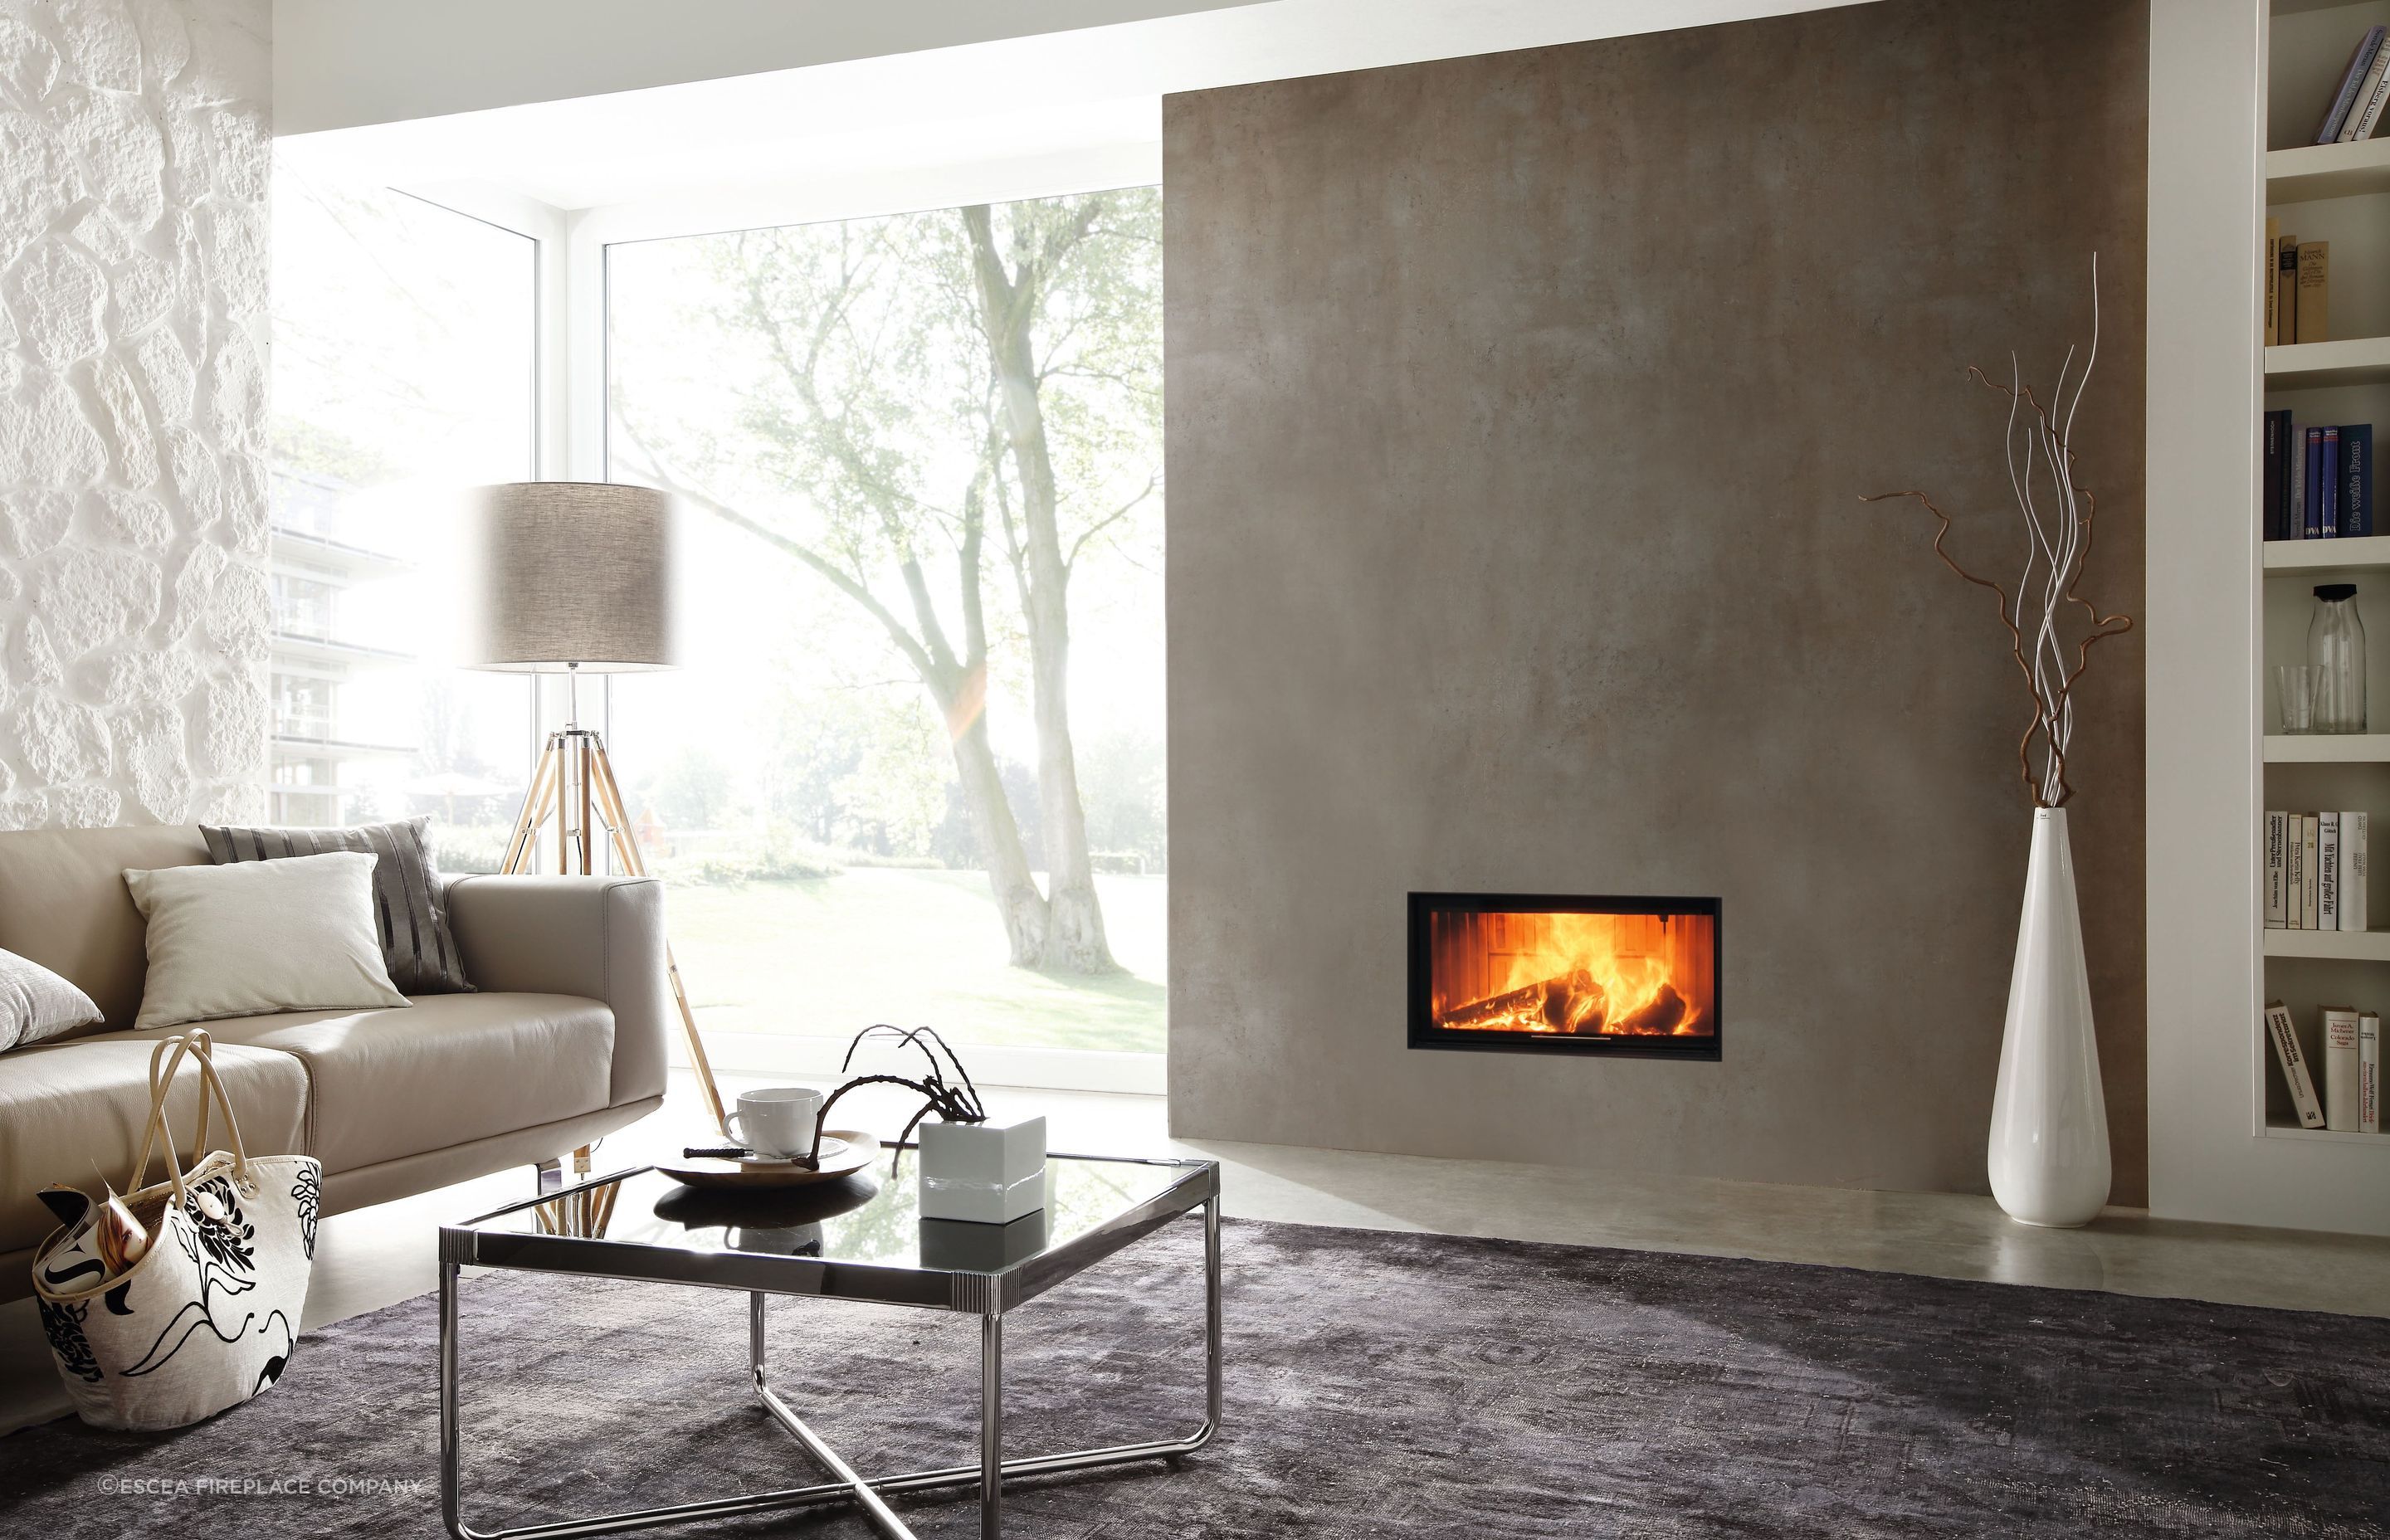 The exquisite Spartherm Large Wood Fire features a large glass front that allows the flames of your fire to take centre stage